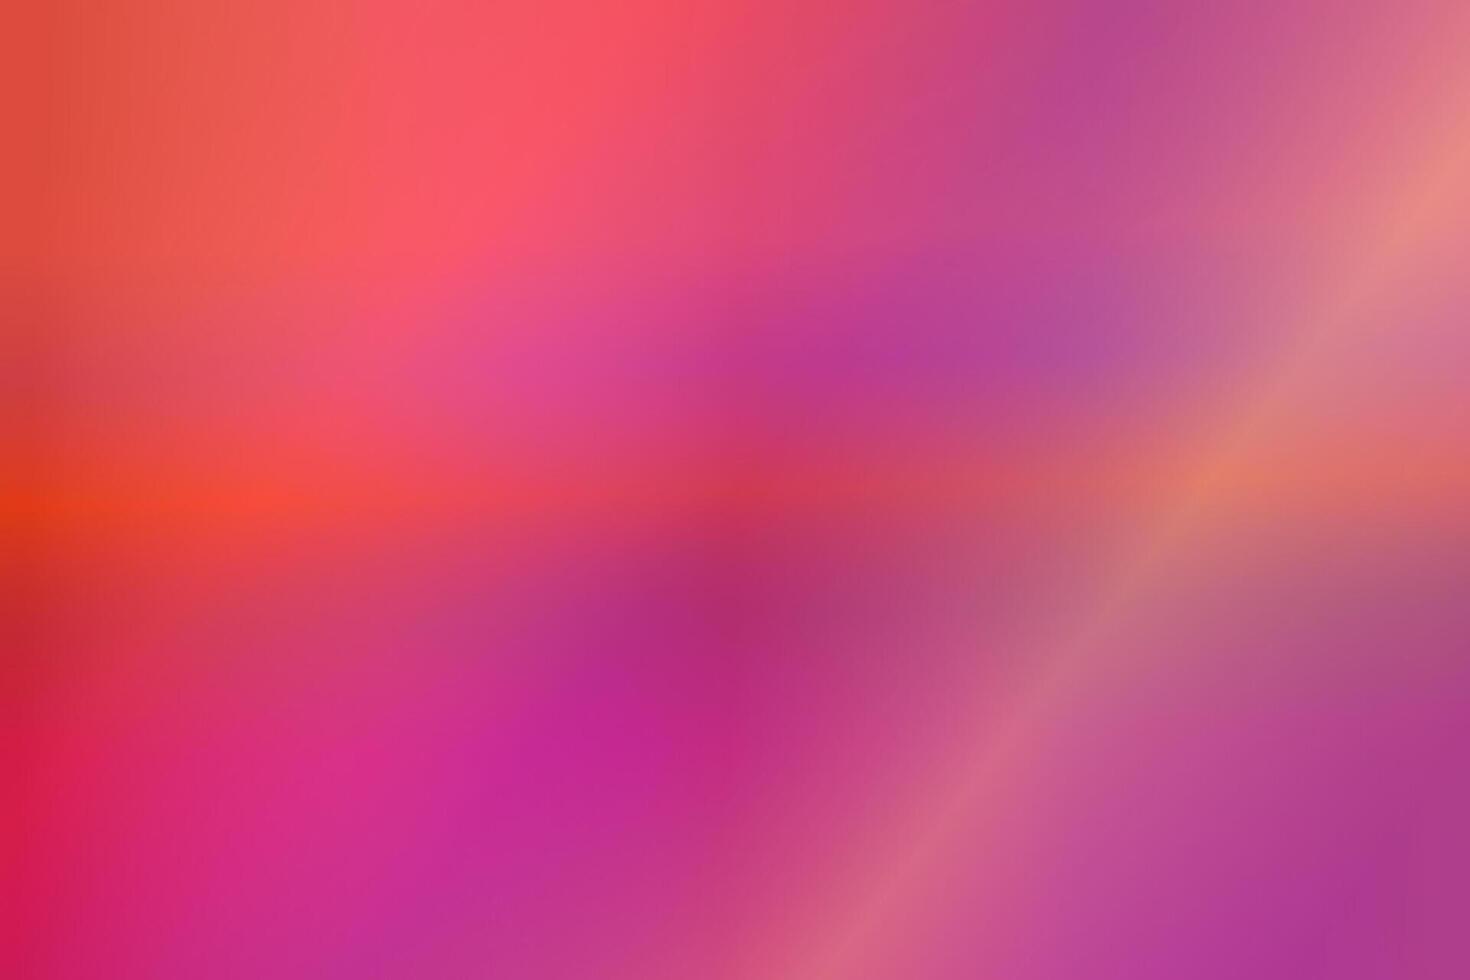 Pink gradient background - simple abstract vector graphic